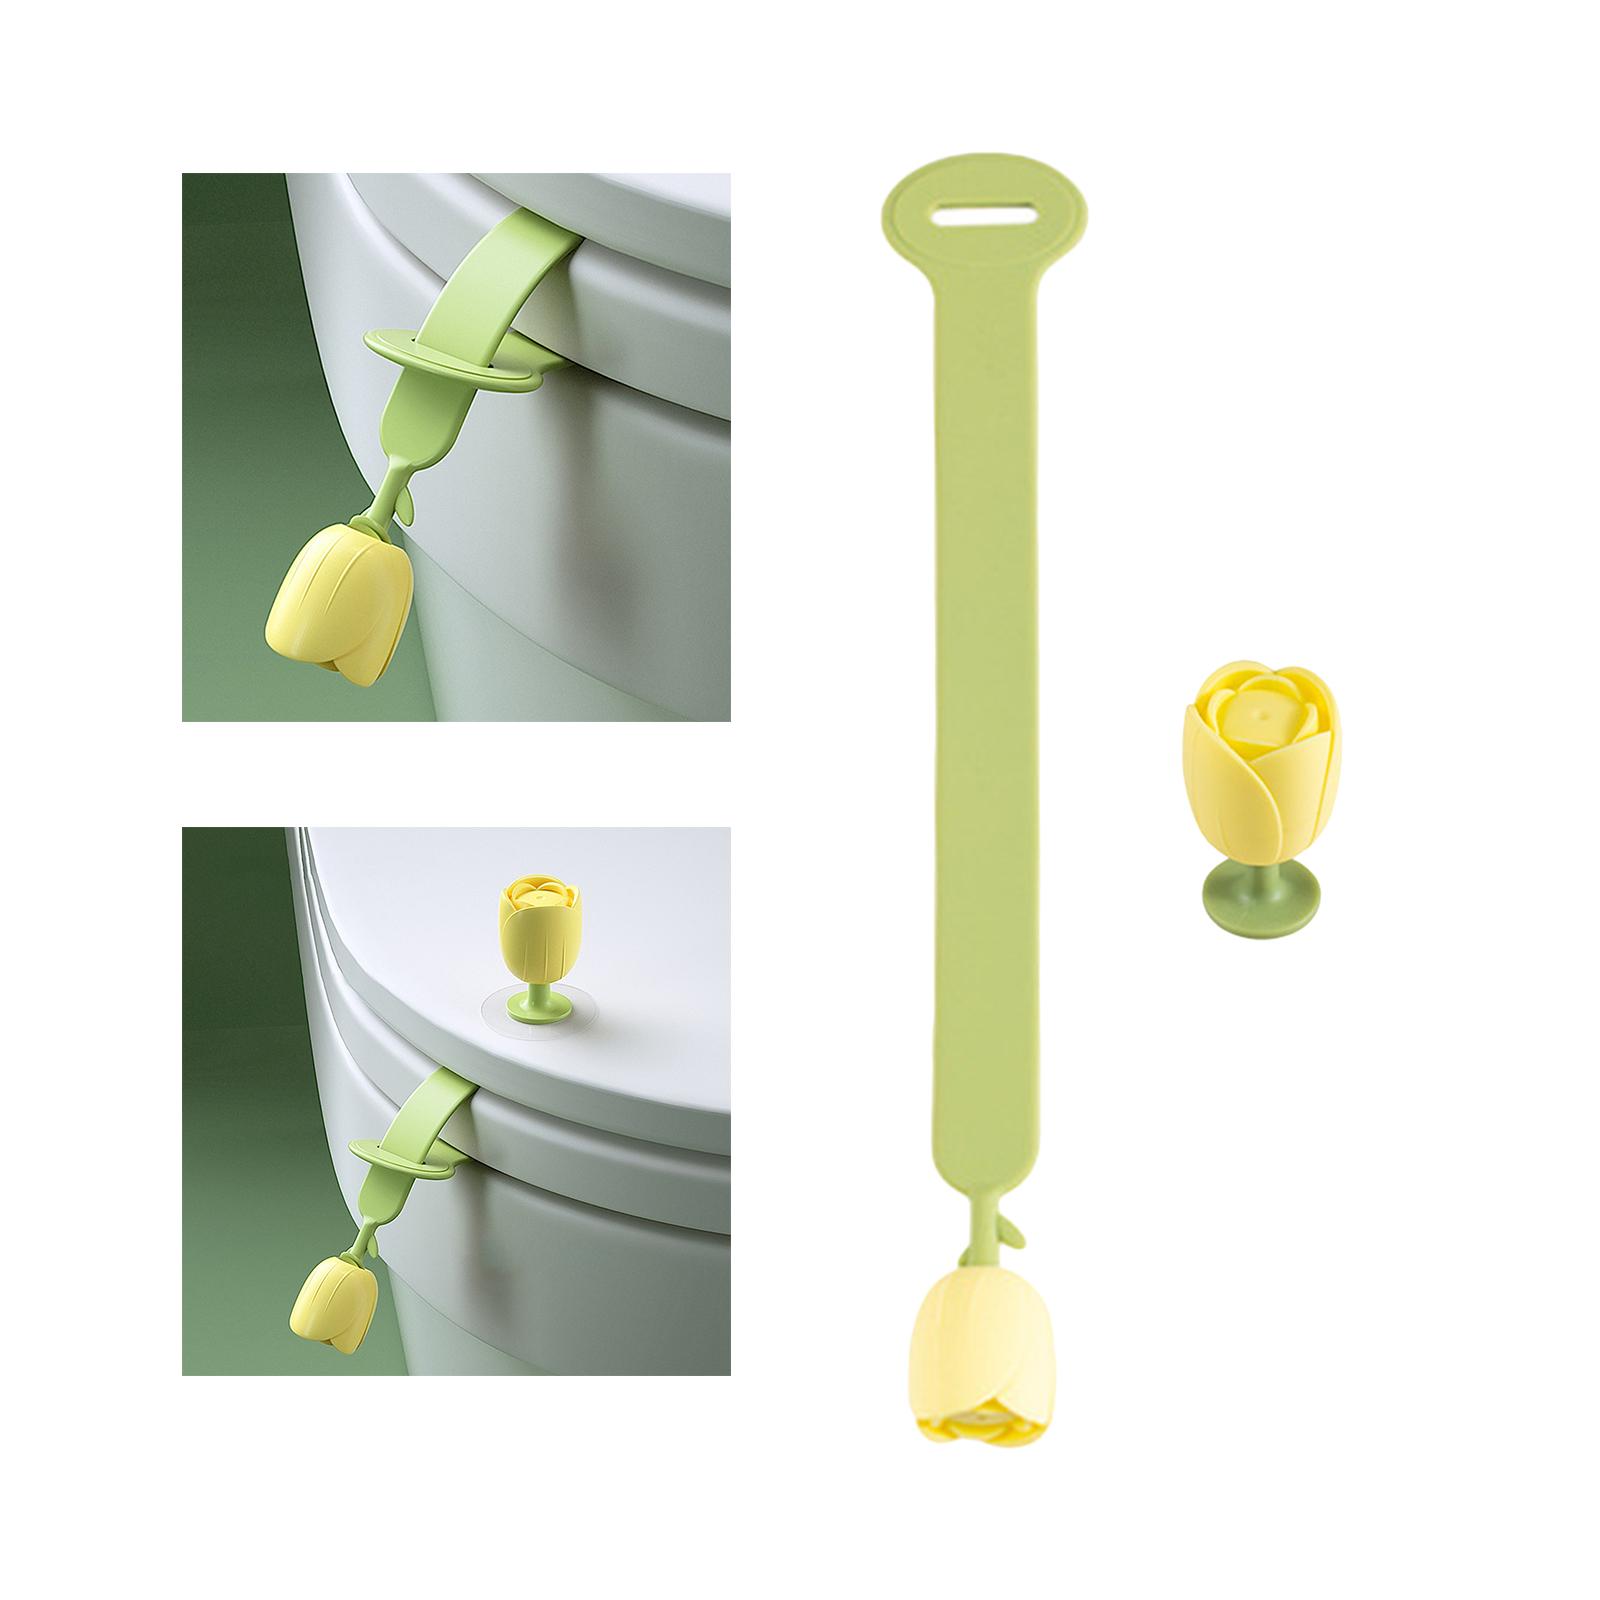 Floral Toilet Cover Lifter Avoid Touching Portable Lift Tool for Office Green Color Set